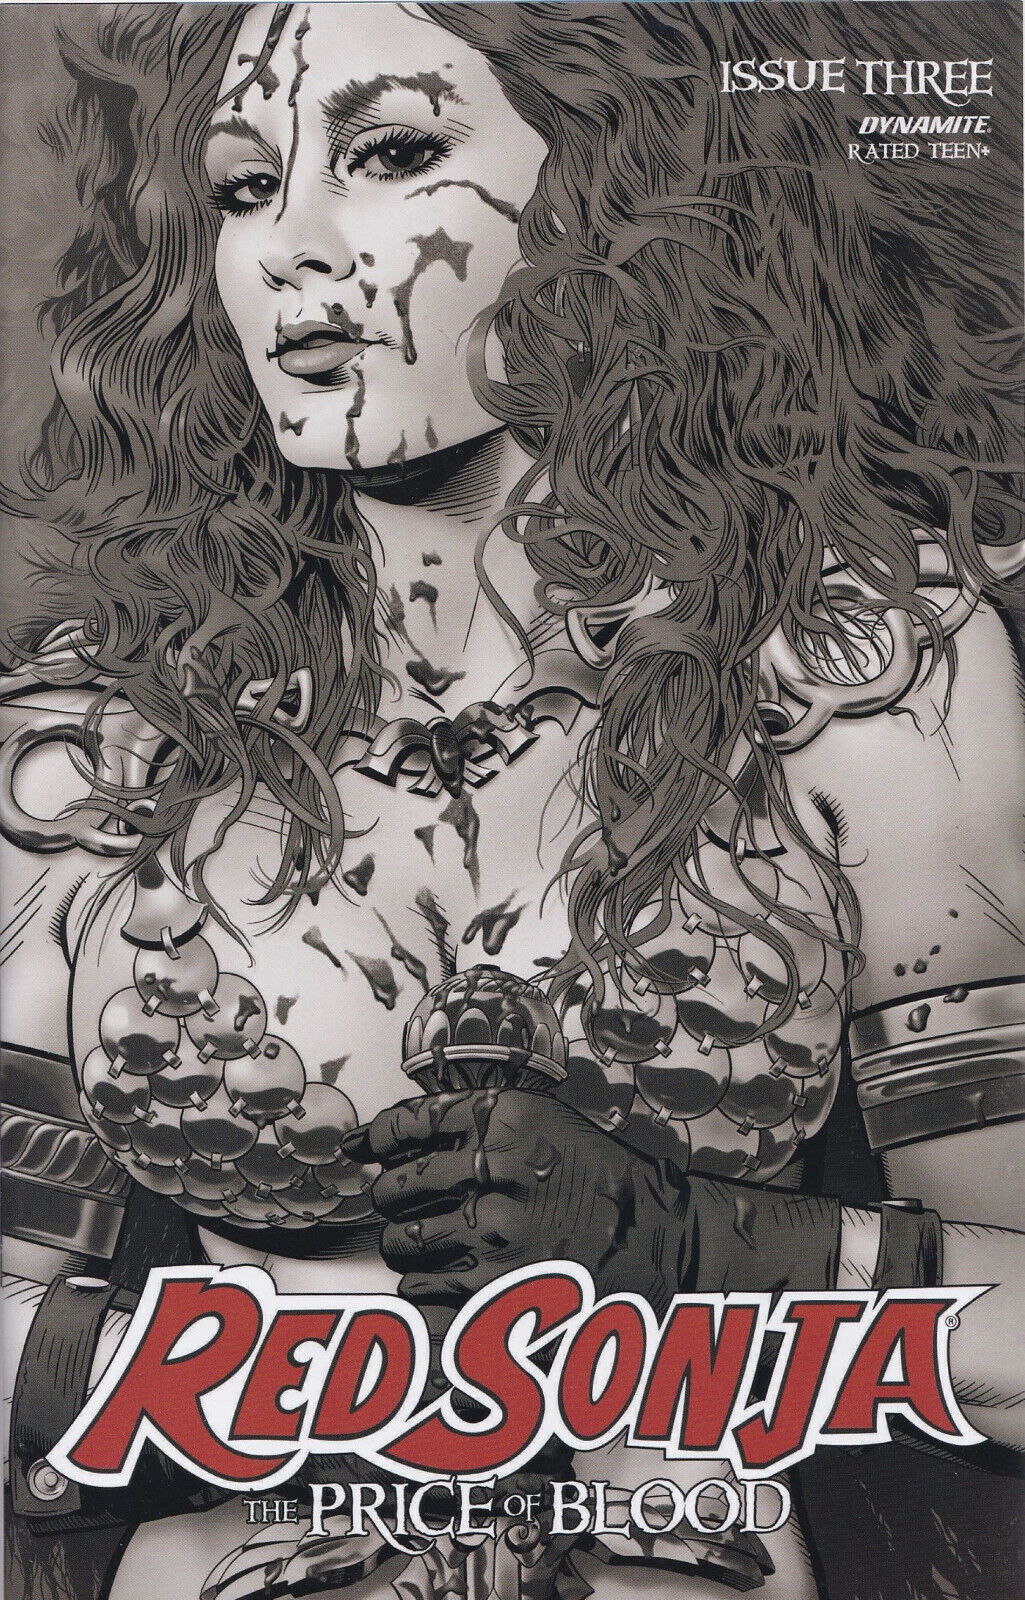 RED SONJA: PRICE OF BLOOD #3 (GOLDEN 1:10 B&W RATIO VARIANT) COMIC ~ Dynamite